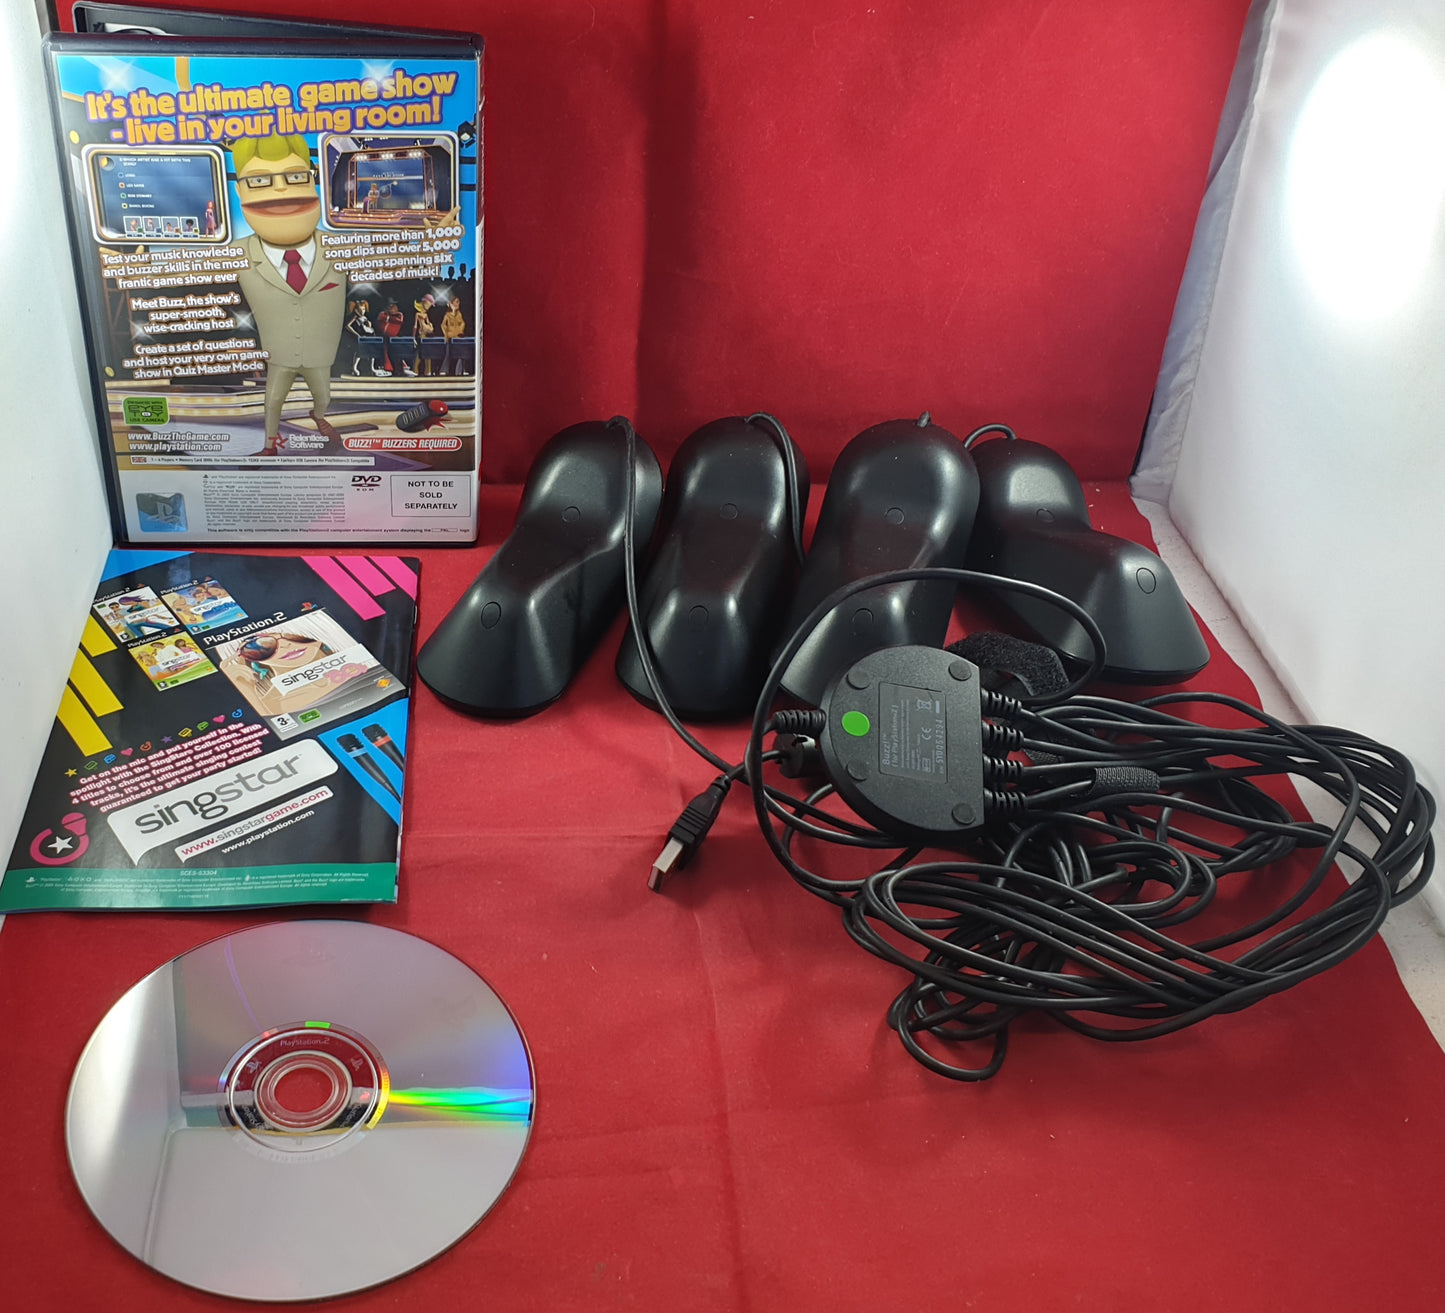 Buzz the Music Quiz & Buzz Controllers Sony Playstation 2 (PS2) Game & Accessory